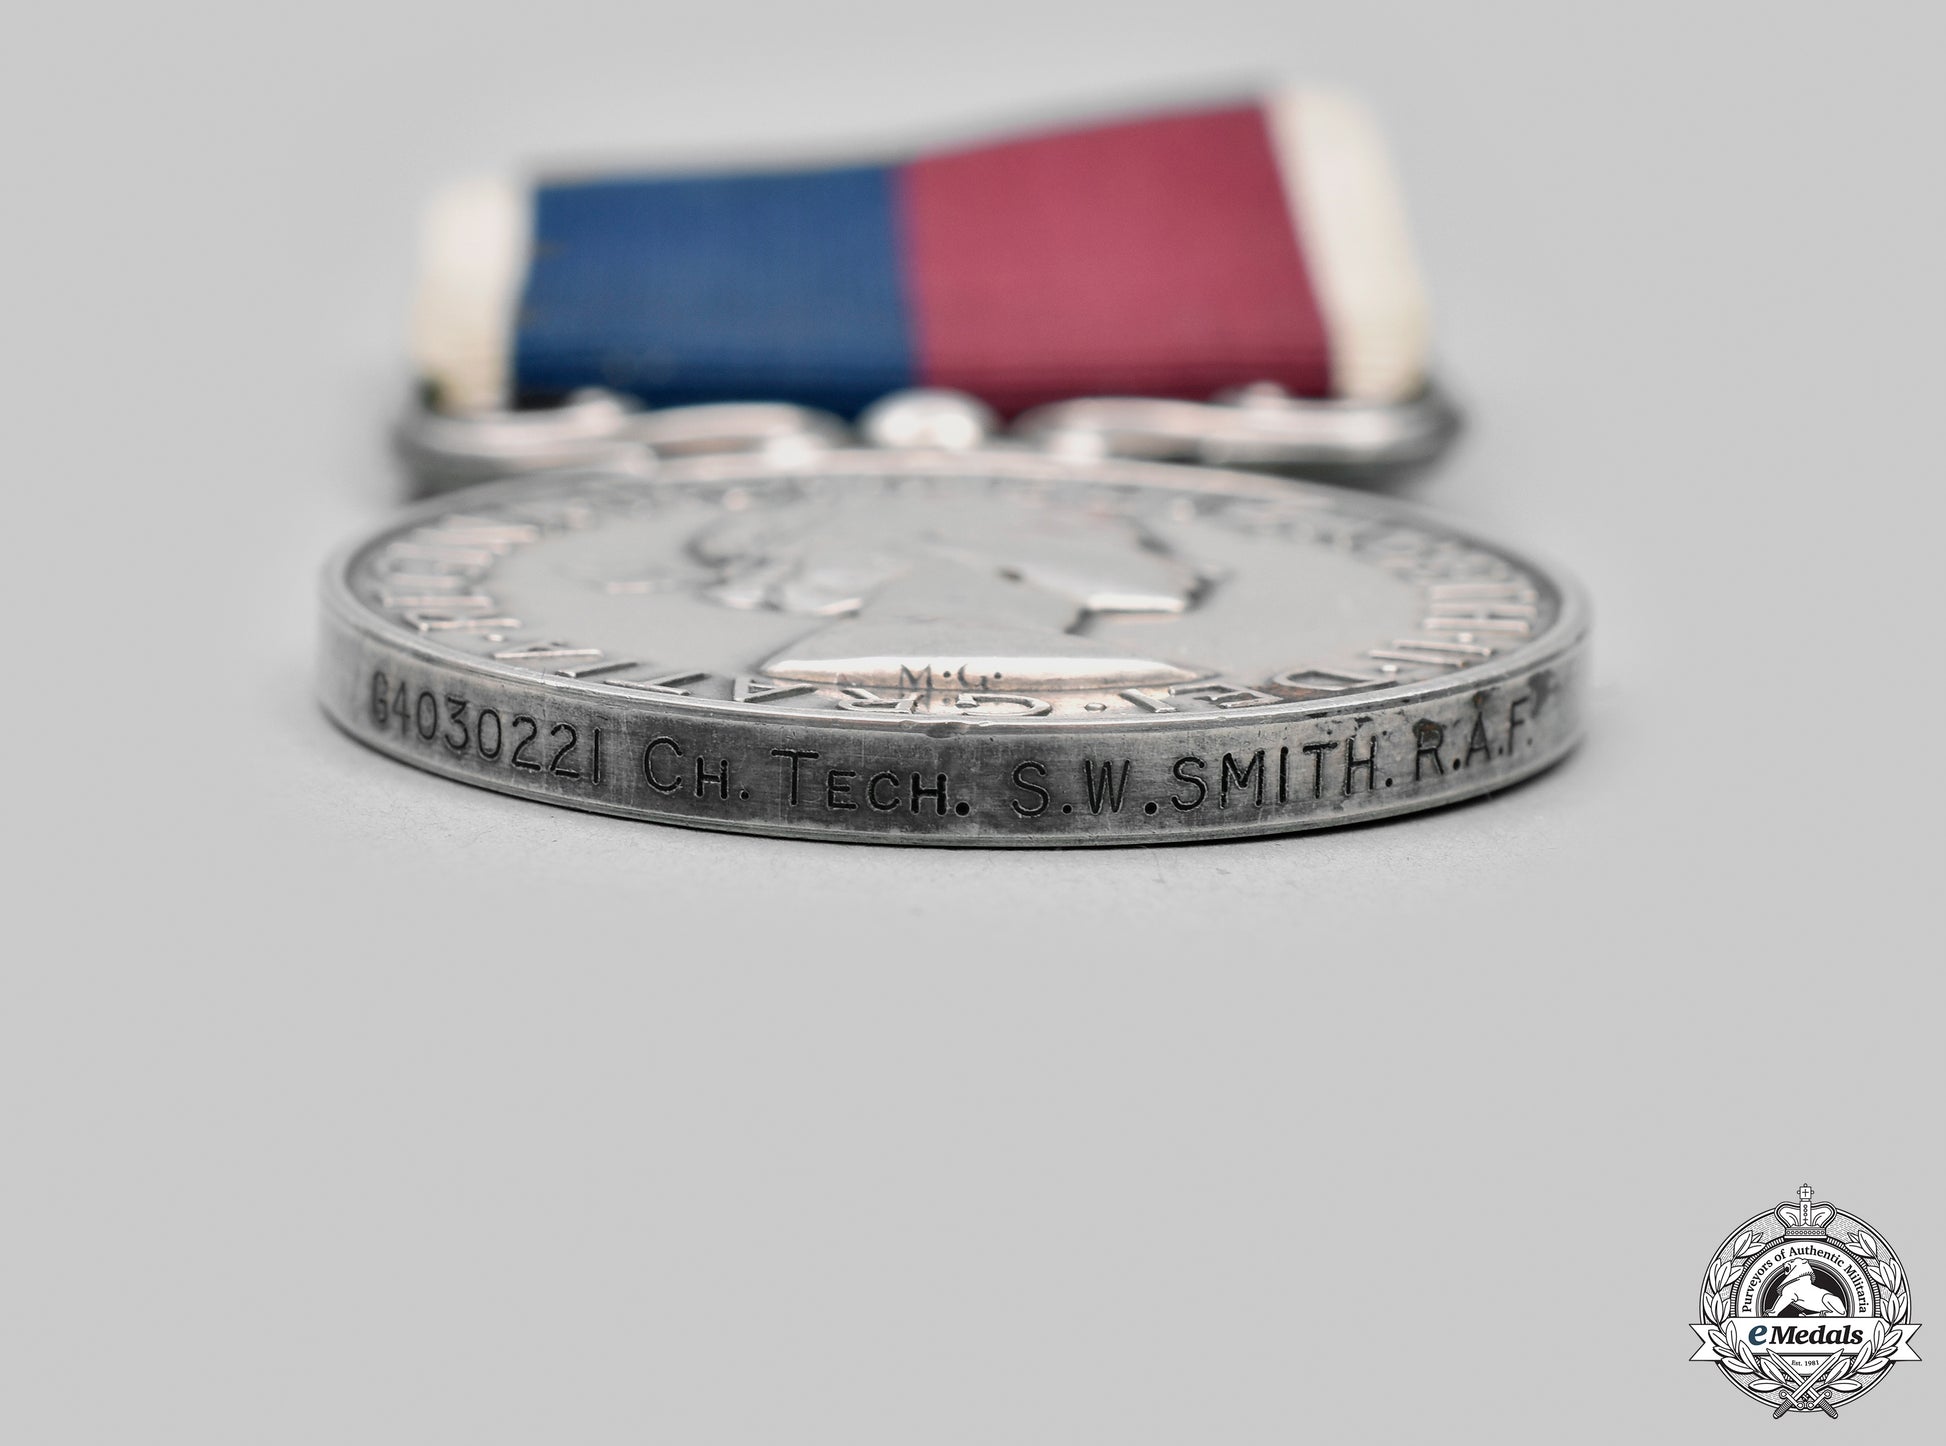 united_kingdom._a_royal_air_force_long_service&_good_conduct_medal,_to_chief_technician_s.w._smith_cic_2021_053_1